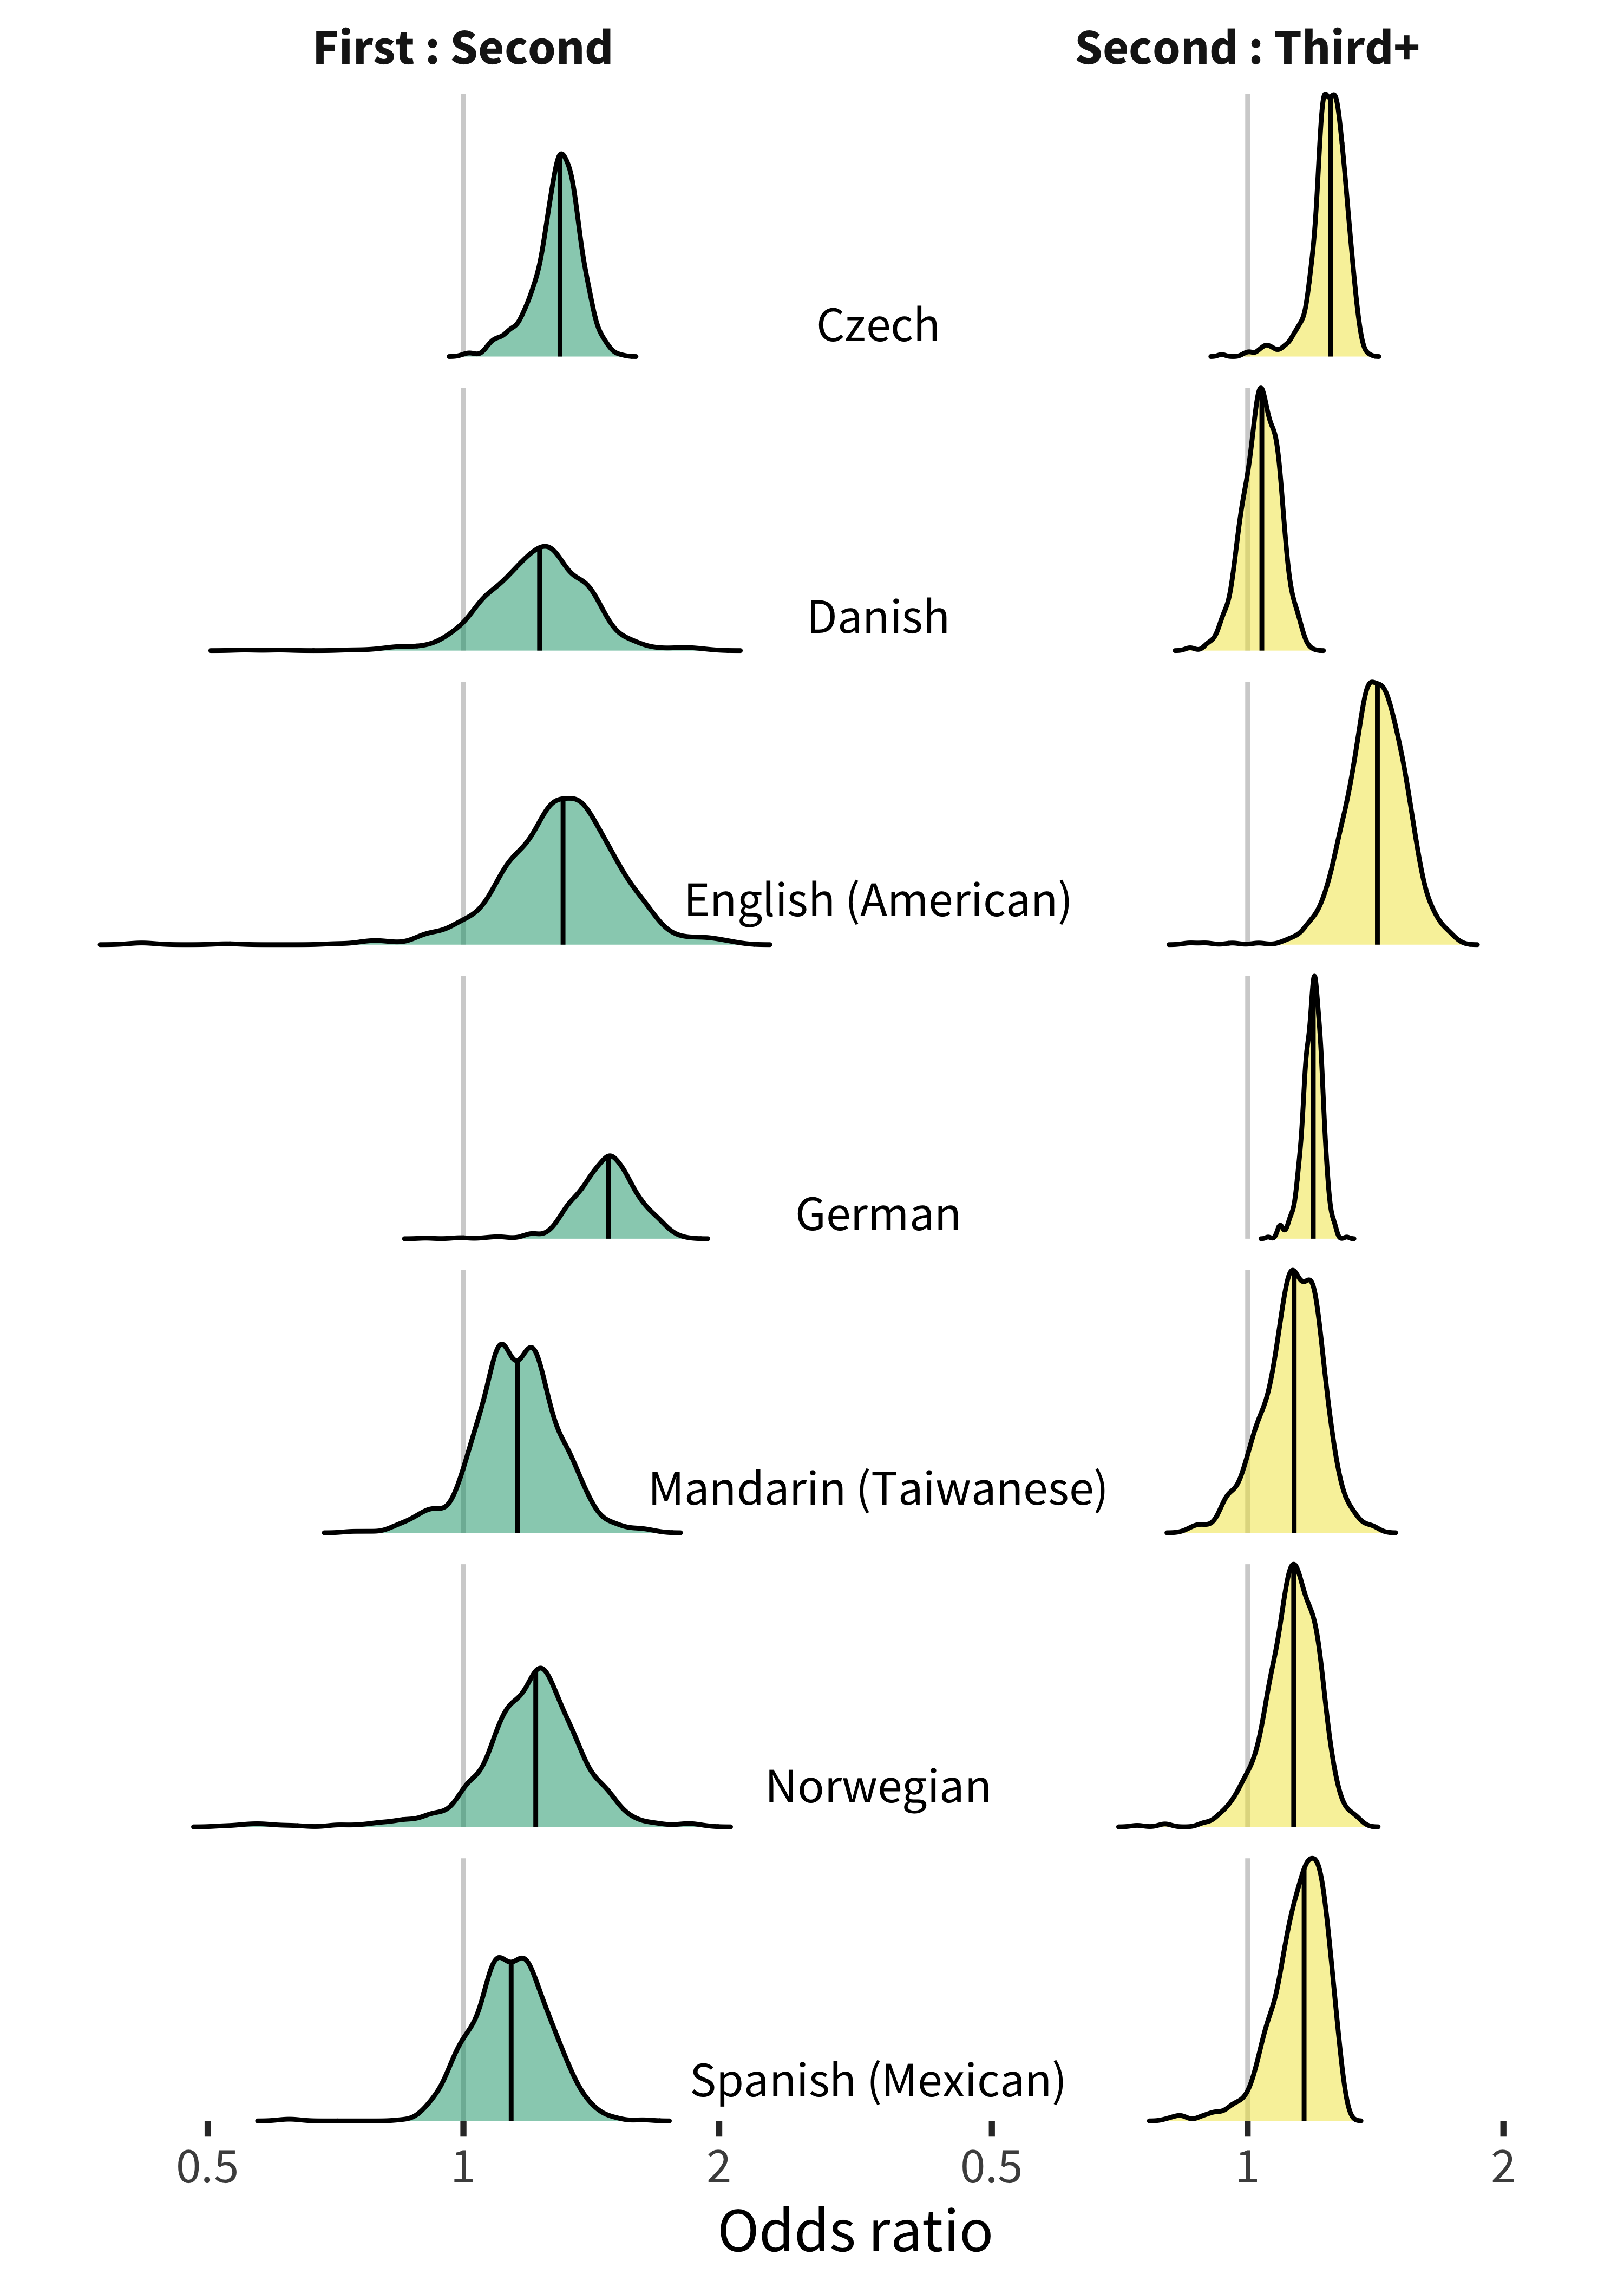 Distribution of birth order item random effects for production data in each language.